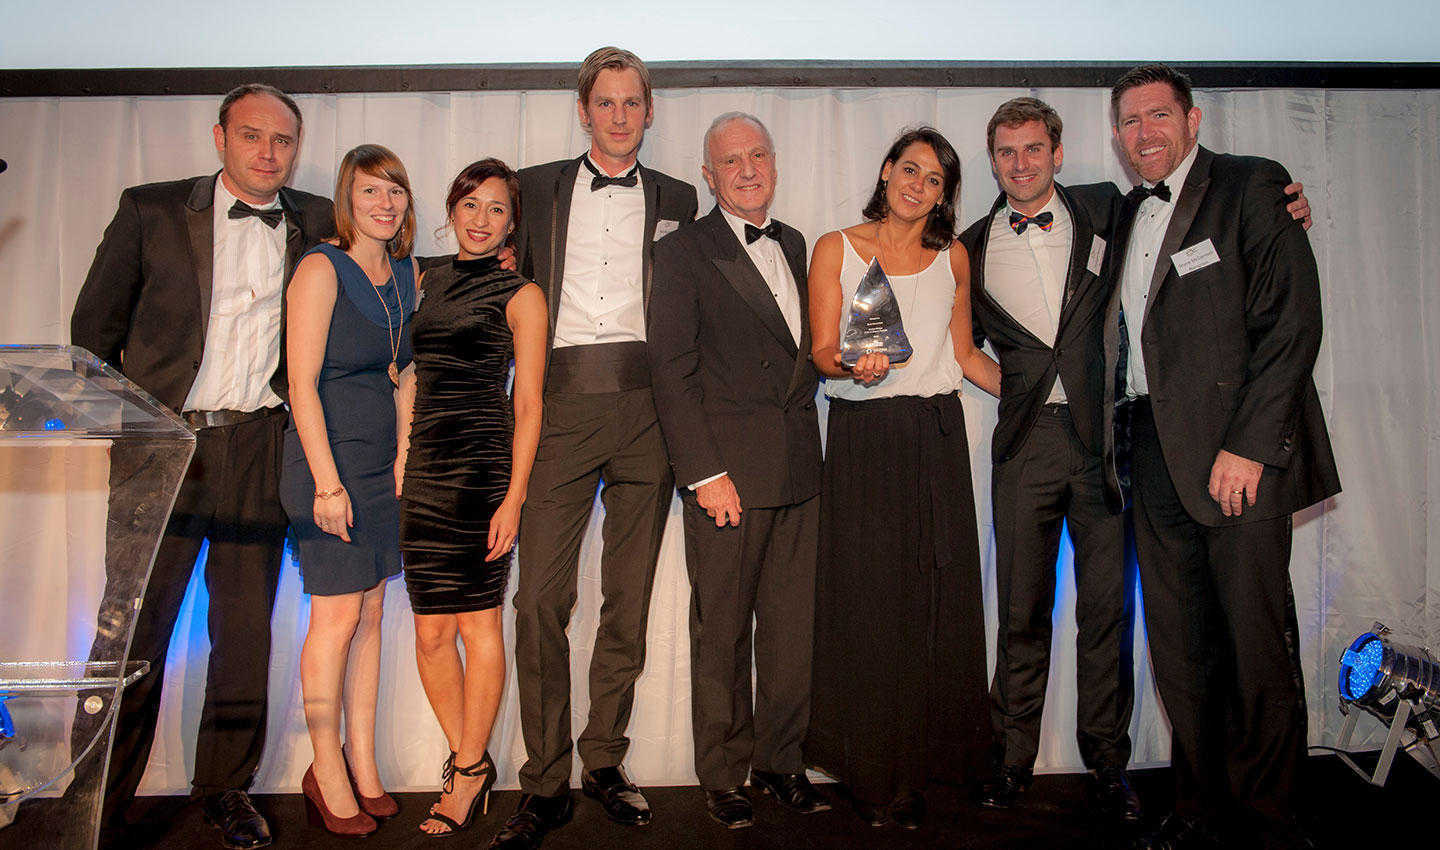 Namgrass team photo as Winners of the Golden Bridge Awards